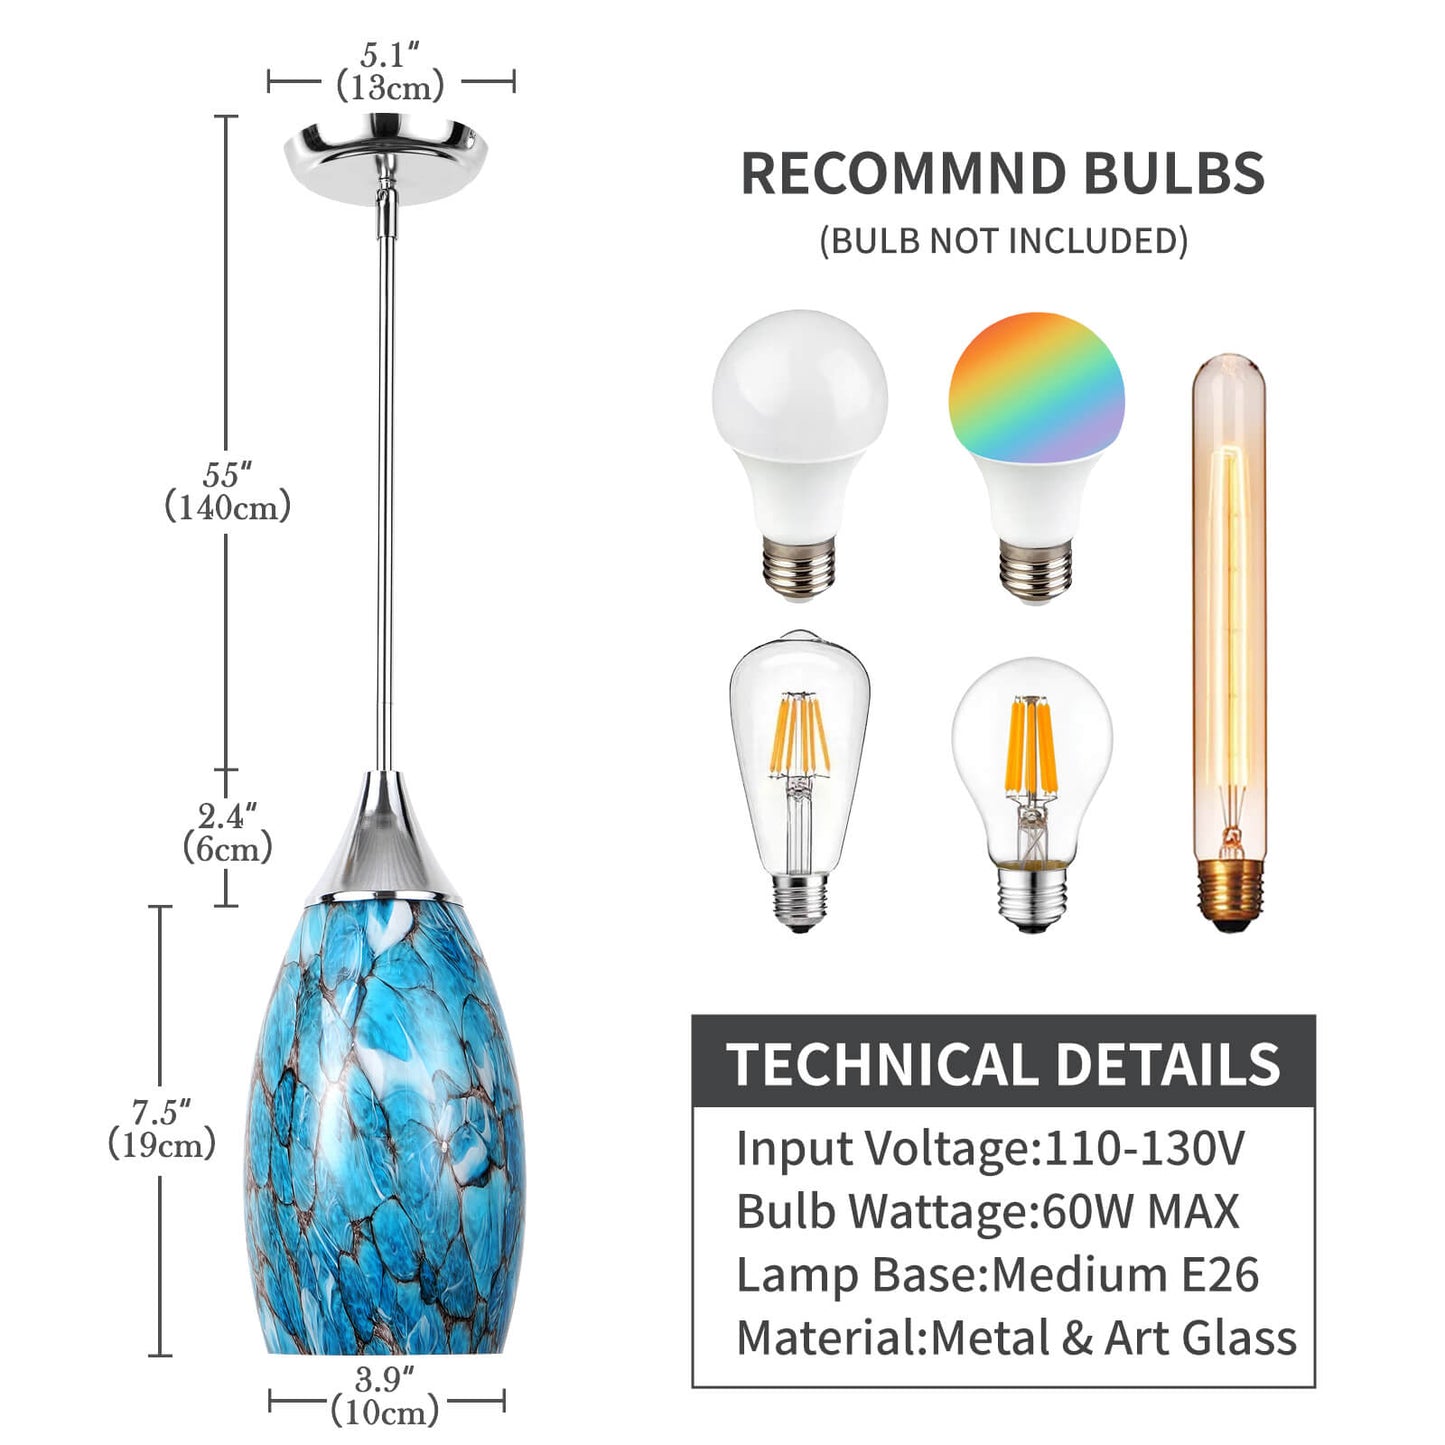 Porseme Pendant Light Features Kitchen Island Hanging Lamp with Plug-in Adjustable Rod Handcraft Art Glass Shade E26 Socket for Home Kitchen Sink Counter Make-up Table (Blue)